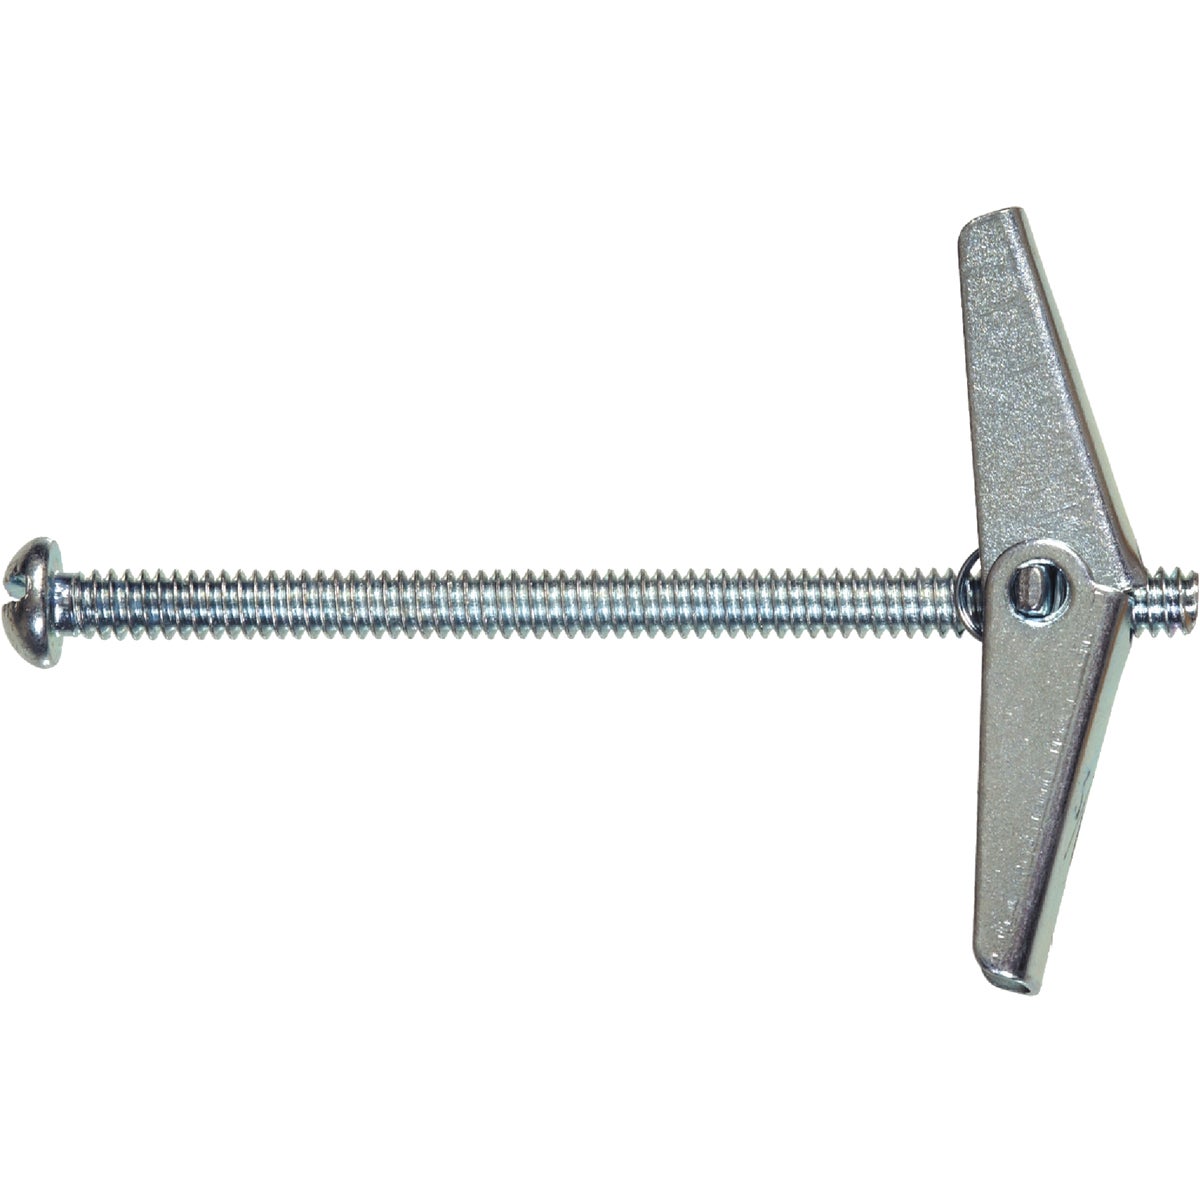 Item 731382, Toggle bolts come with spring-action wings and are intended for anchoring 